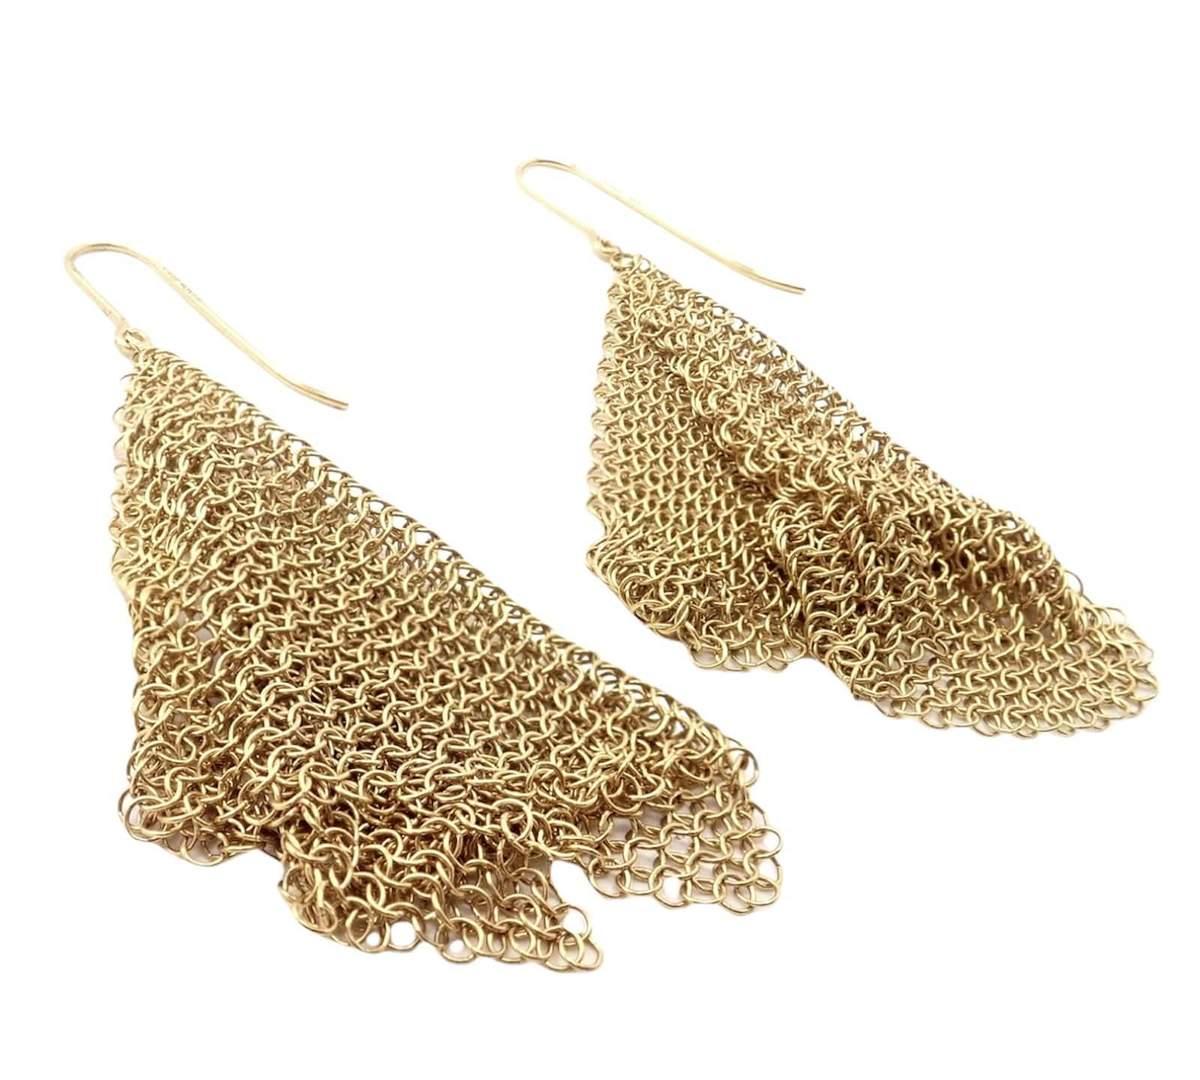 Vintage Tiffany & Co. Elsa Peretti 18k Yellow Gold Mesh Dangle Earrings. 

Metal: 18k Yellow Gold
Size: 60mm x 12mm
Weight: 7.1 grams
Style: Elsa Peretti
Stamped Hallmarks: T & Co 750
*Free Shipping within the United States
YOUR PRICE: $2,250
JW7aahx